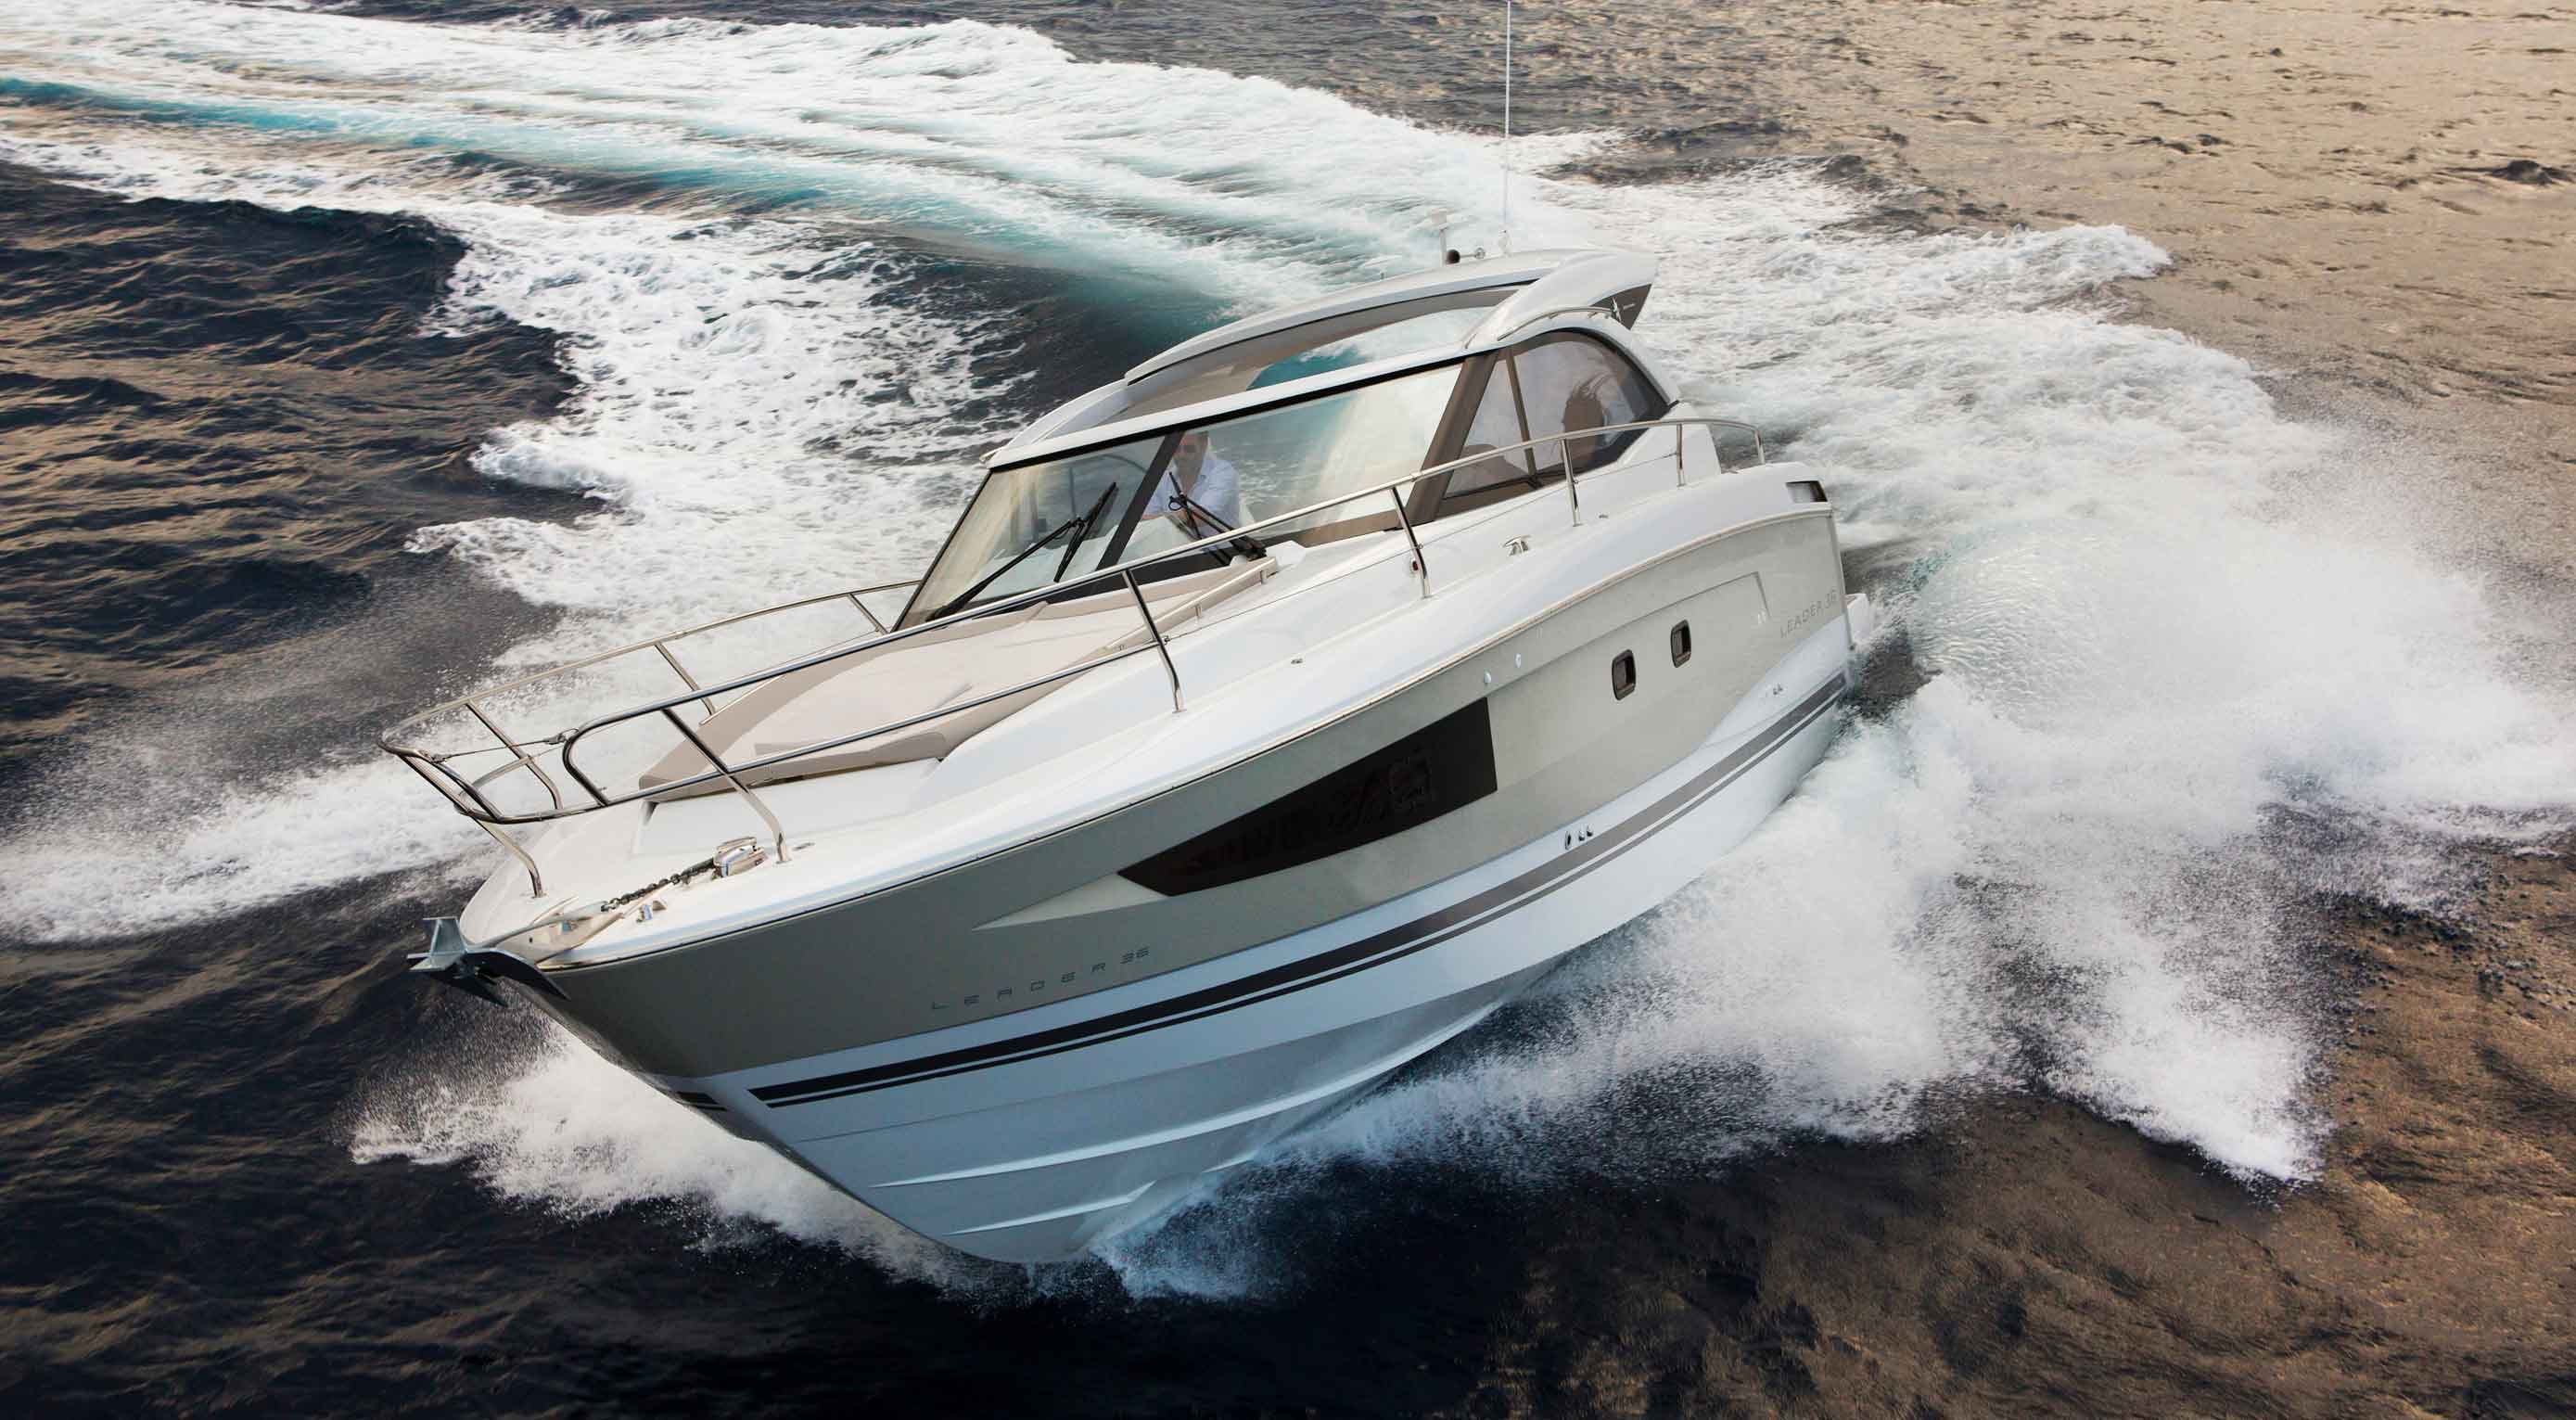 Jeanneau Leader 36, “the family boat”